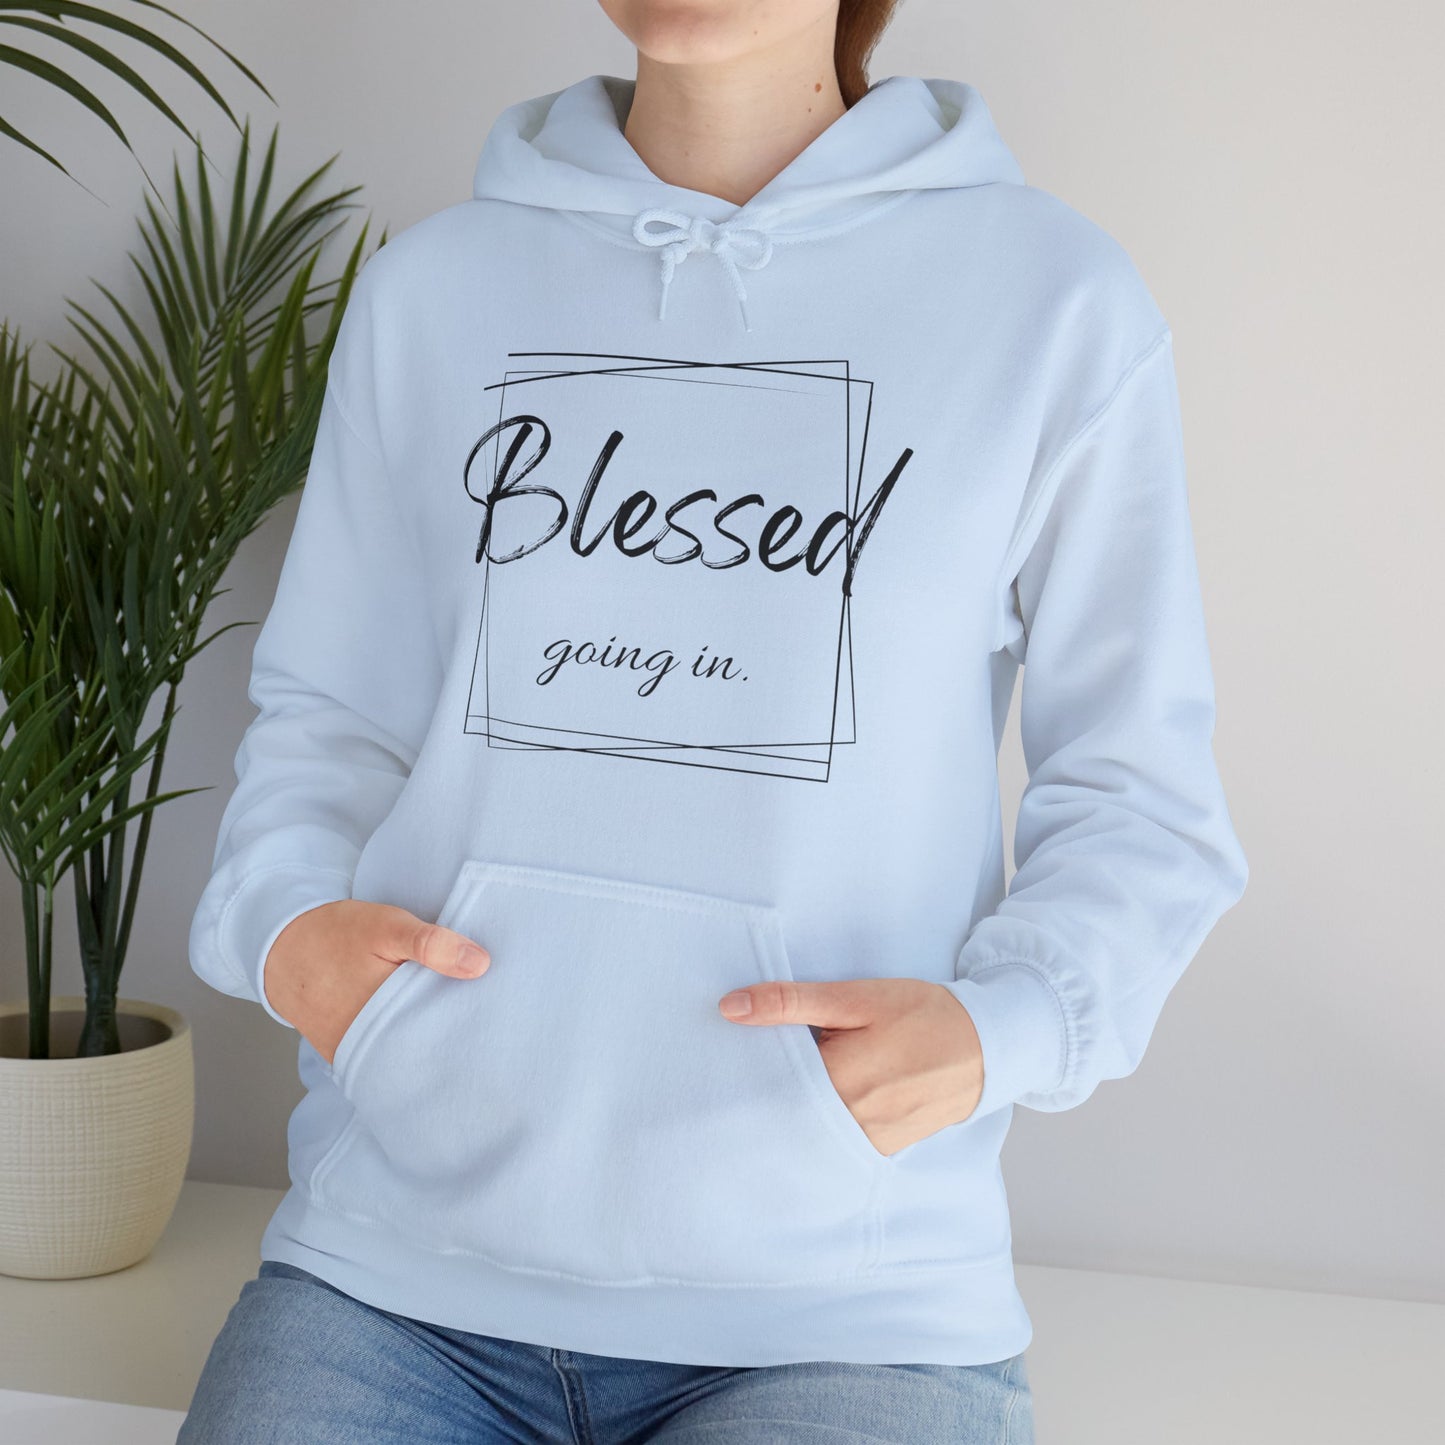 Blessed Going In, Blessed Going Out - Unisex Hooded Sweatshirt